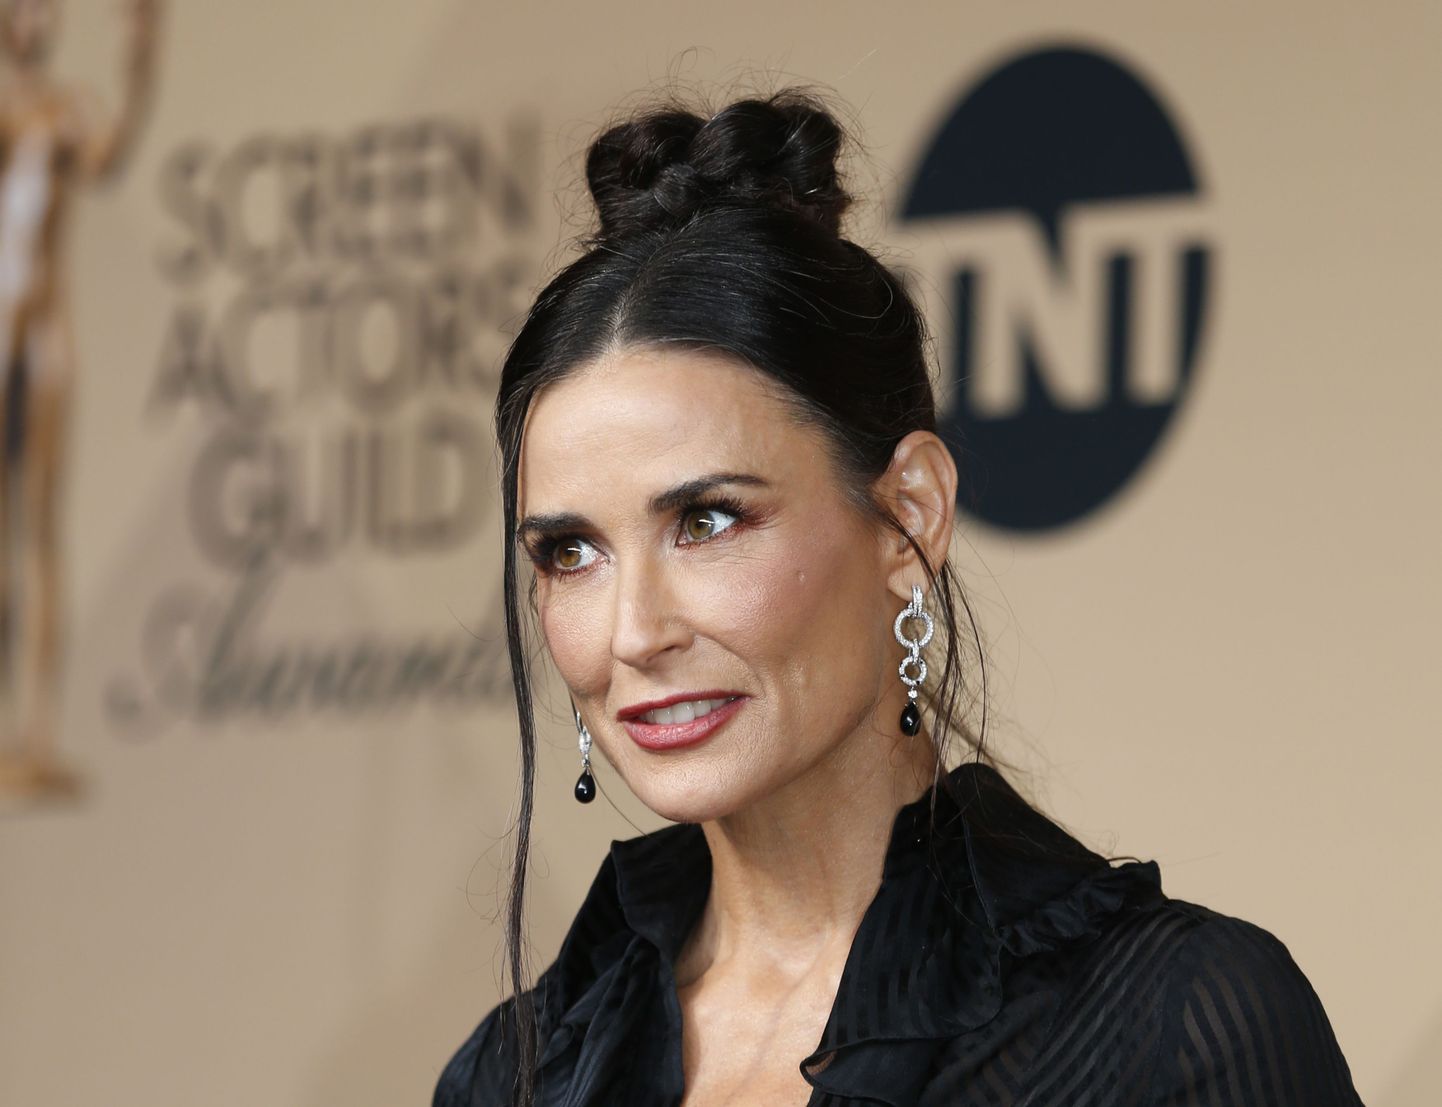 Presenter Demi Moore poses backstage at the 22nd Screen Actors Guild Awards in Los Angeles, California January 30, 2016.  REUTERS/Mike Blake